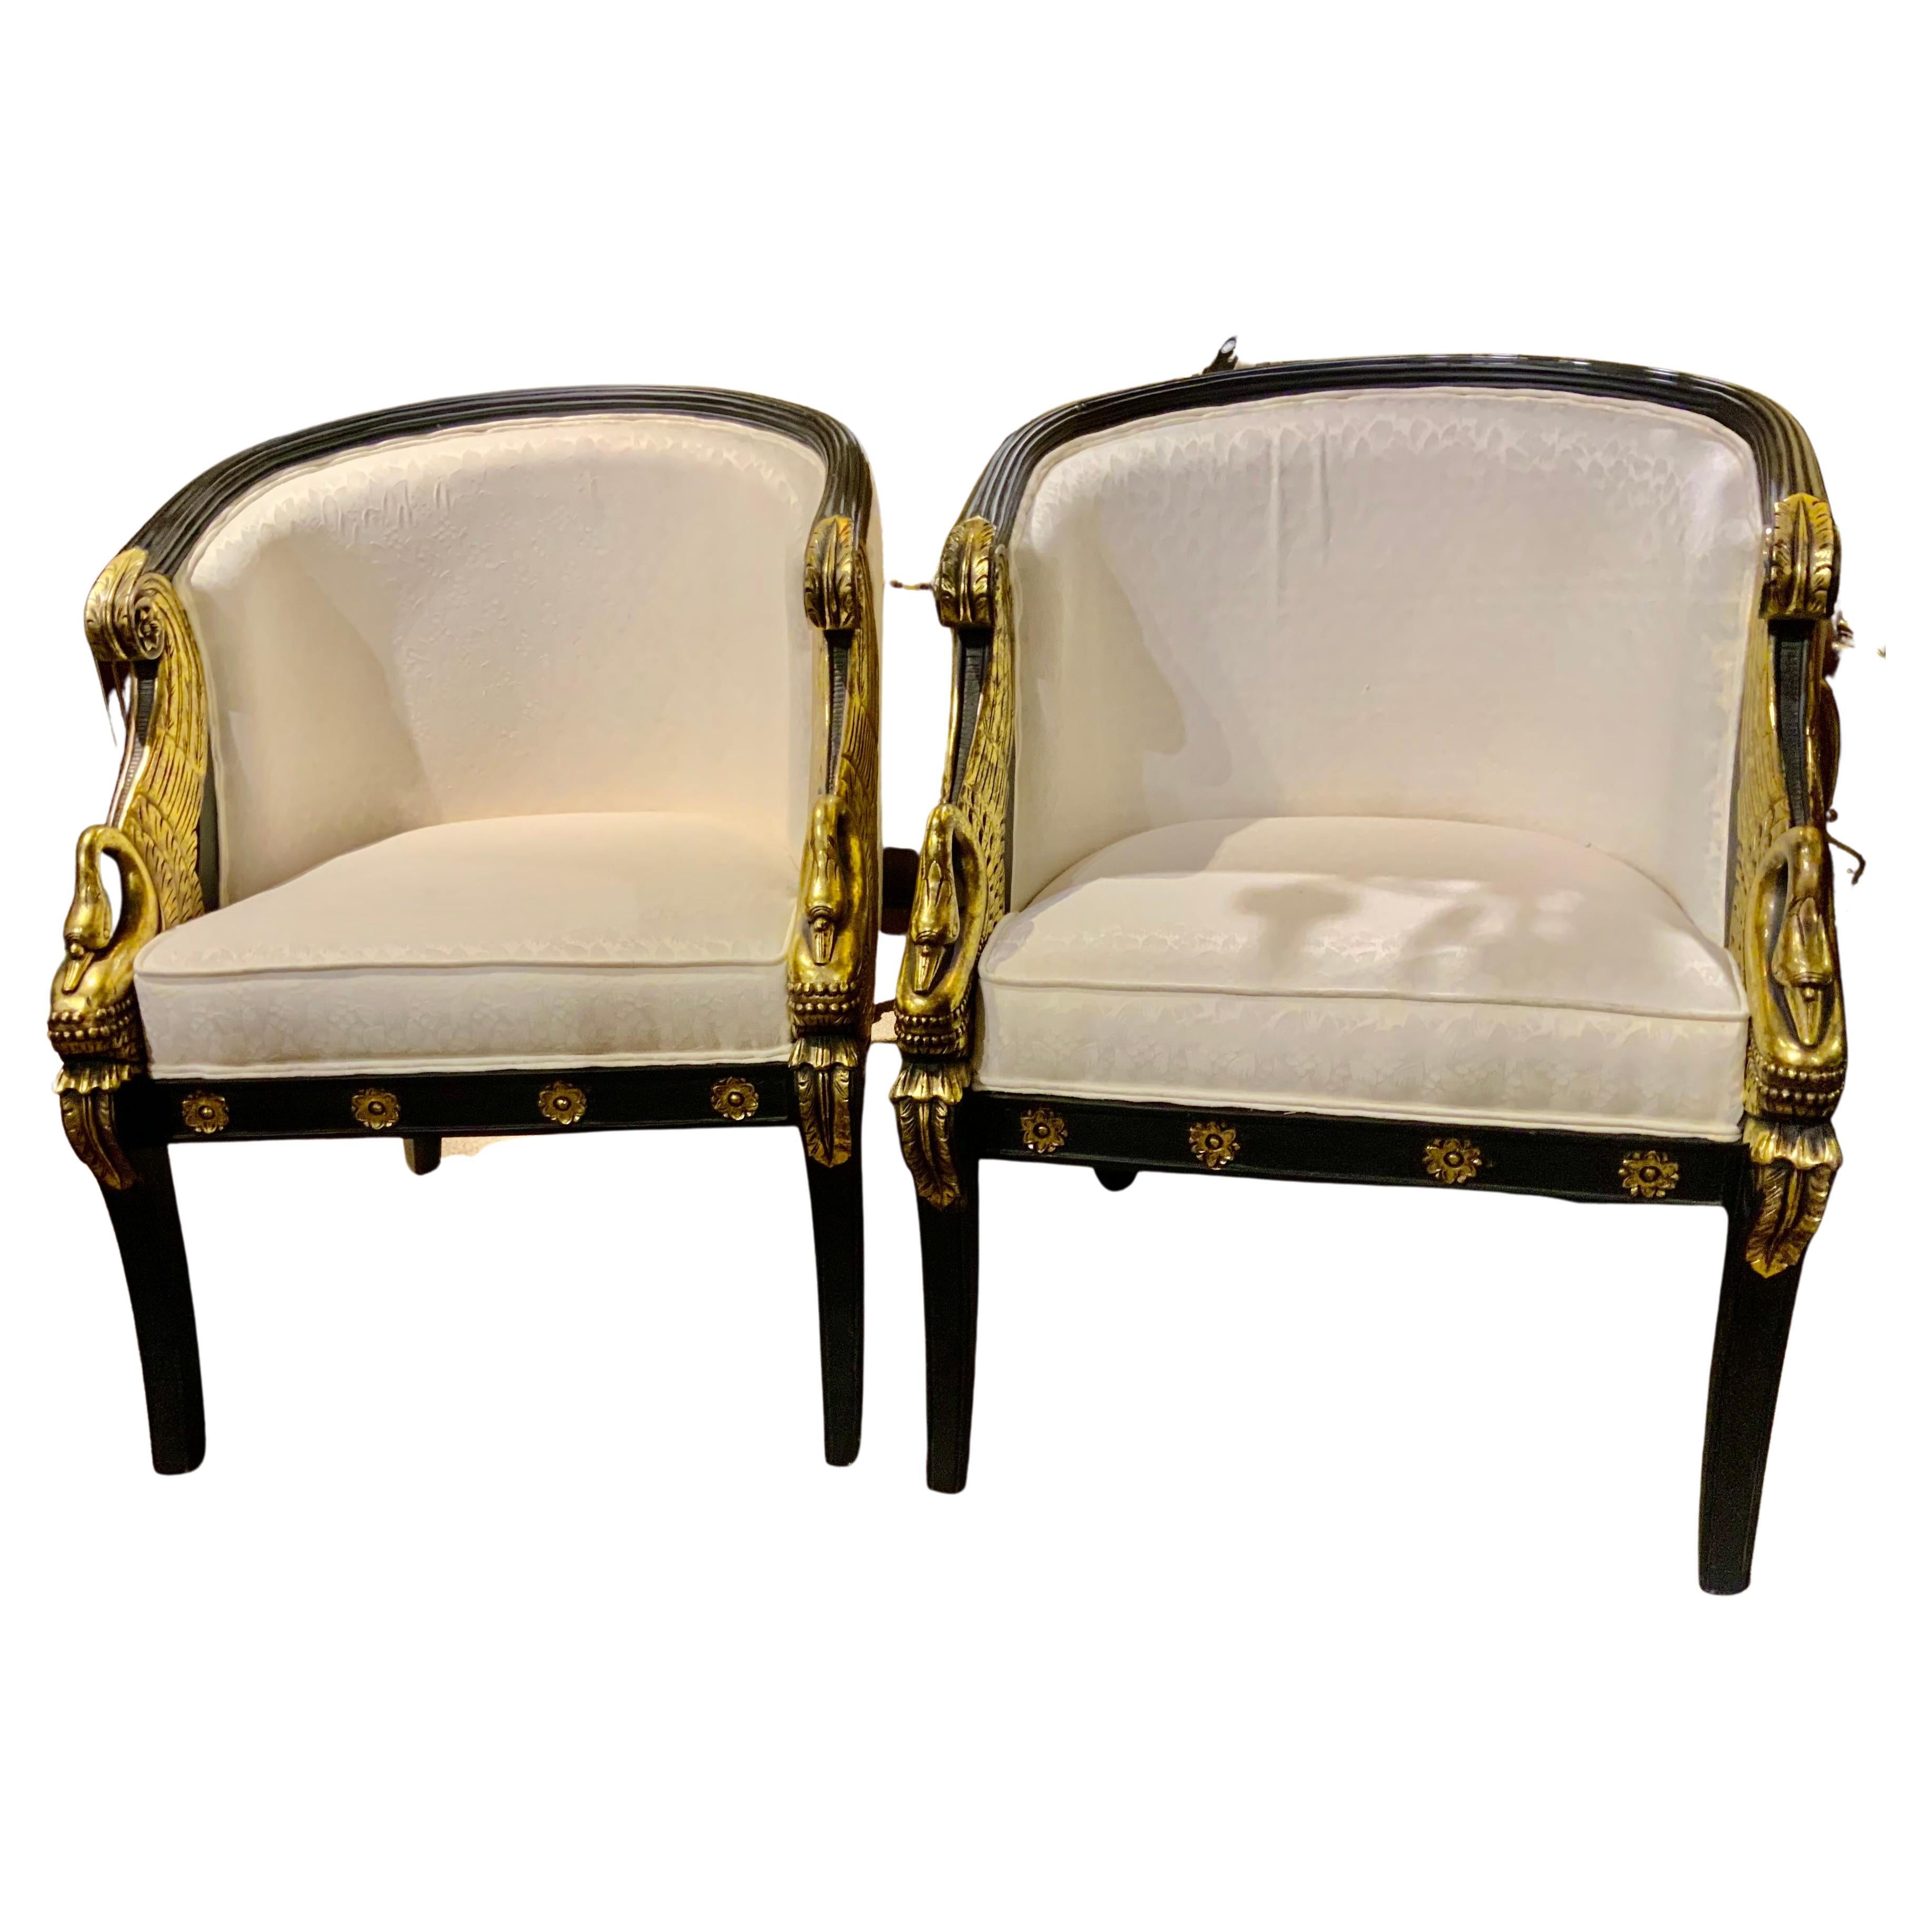 Pair of French Empire-Style Ebonized and Parcel Gilt Bergeres For Sale